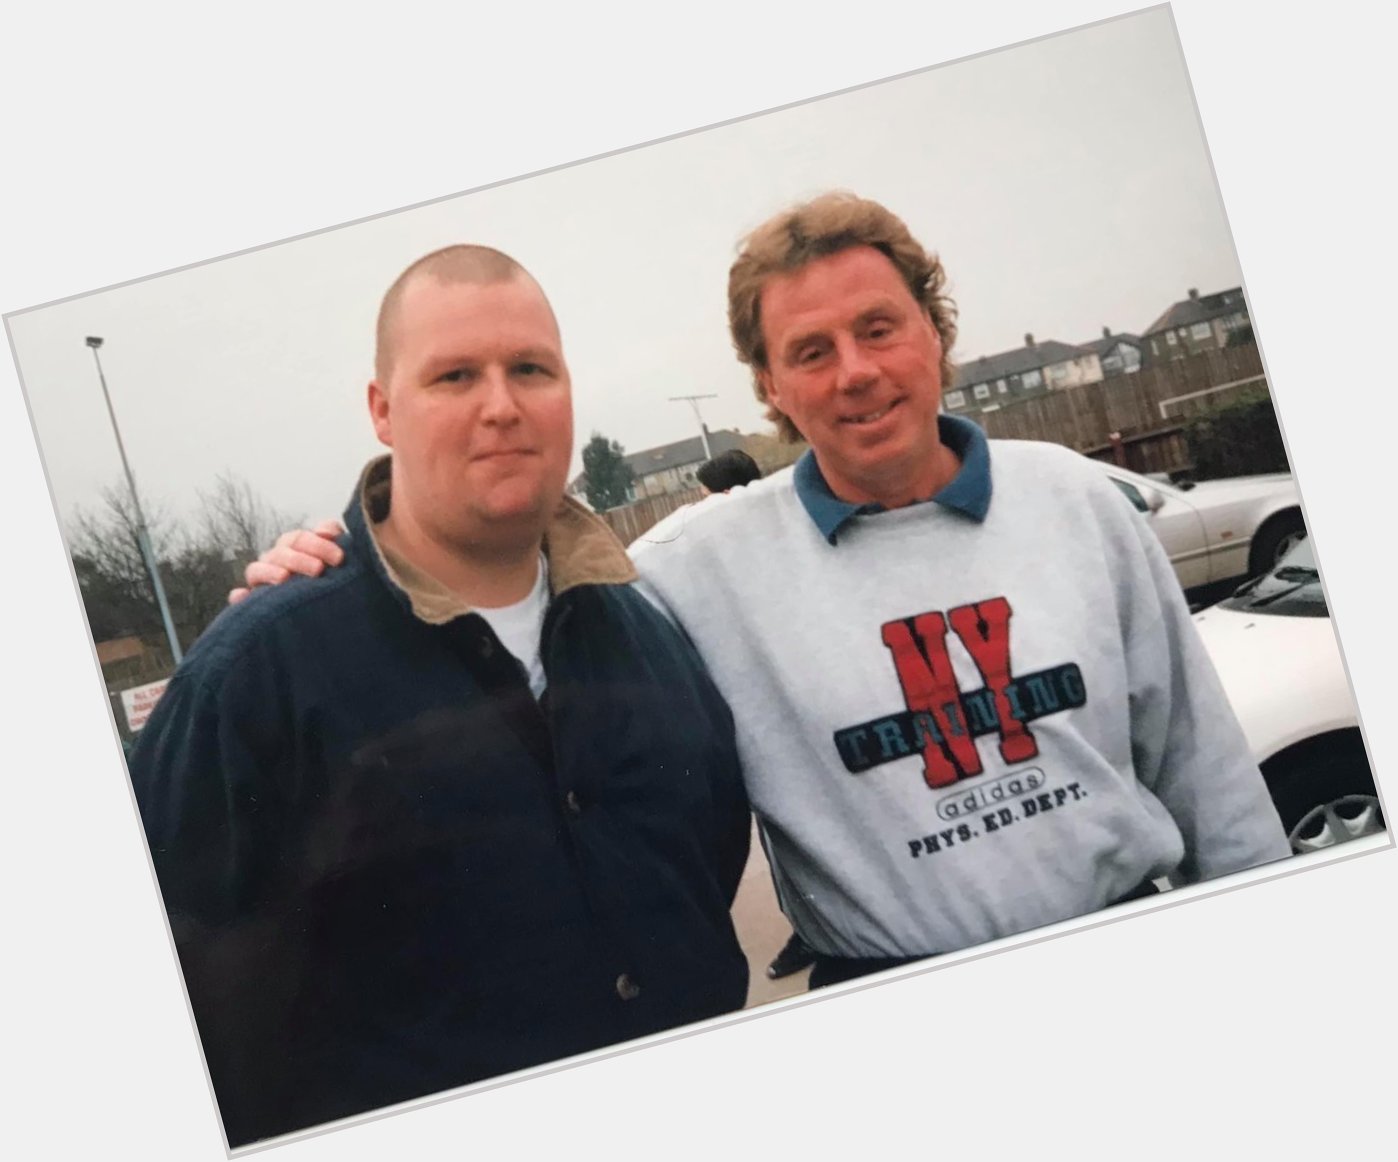 Happy Birthday to Harry Redknapp, always had time for a chat down the training ground, too bloke. 